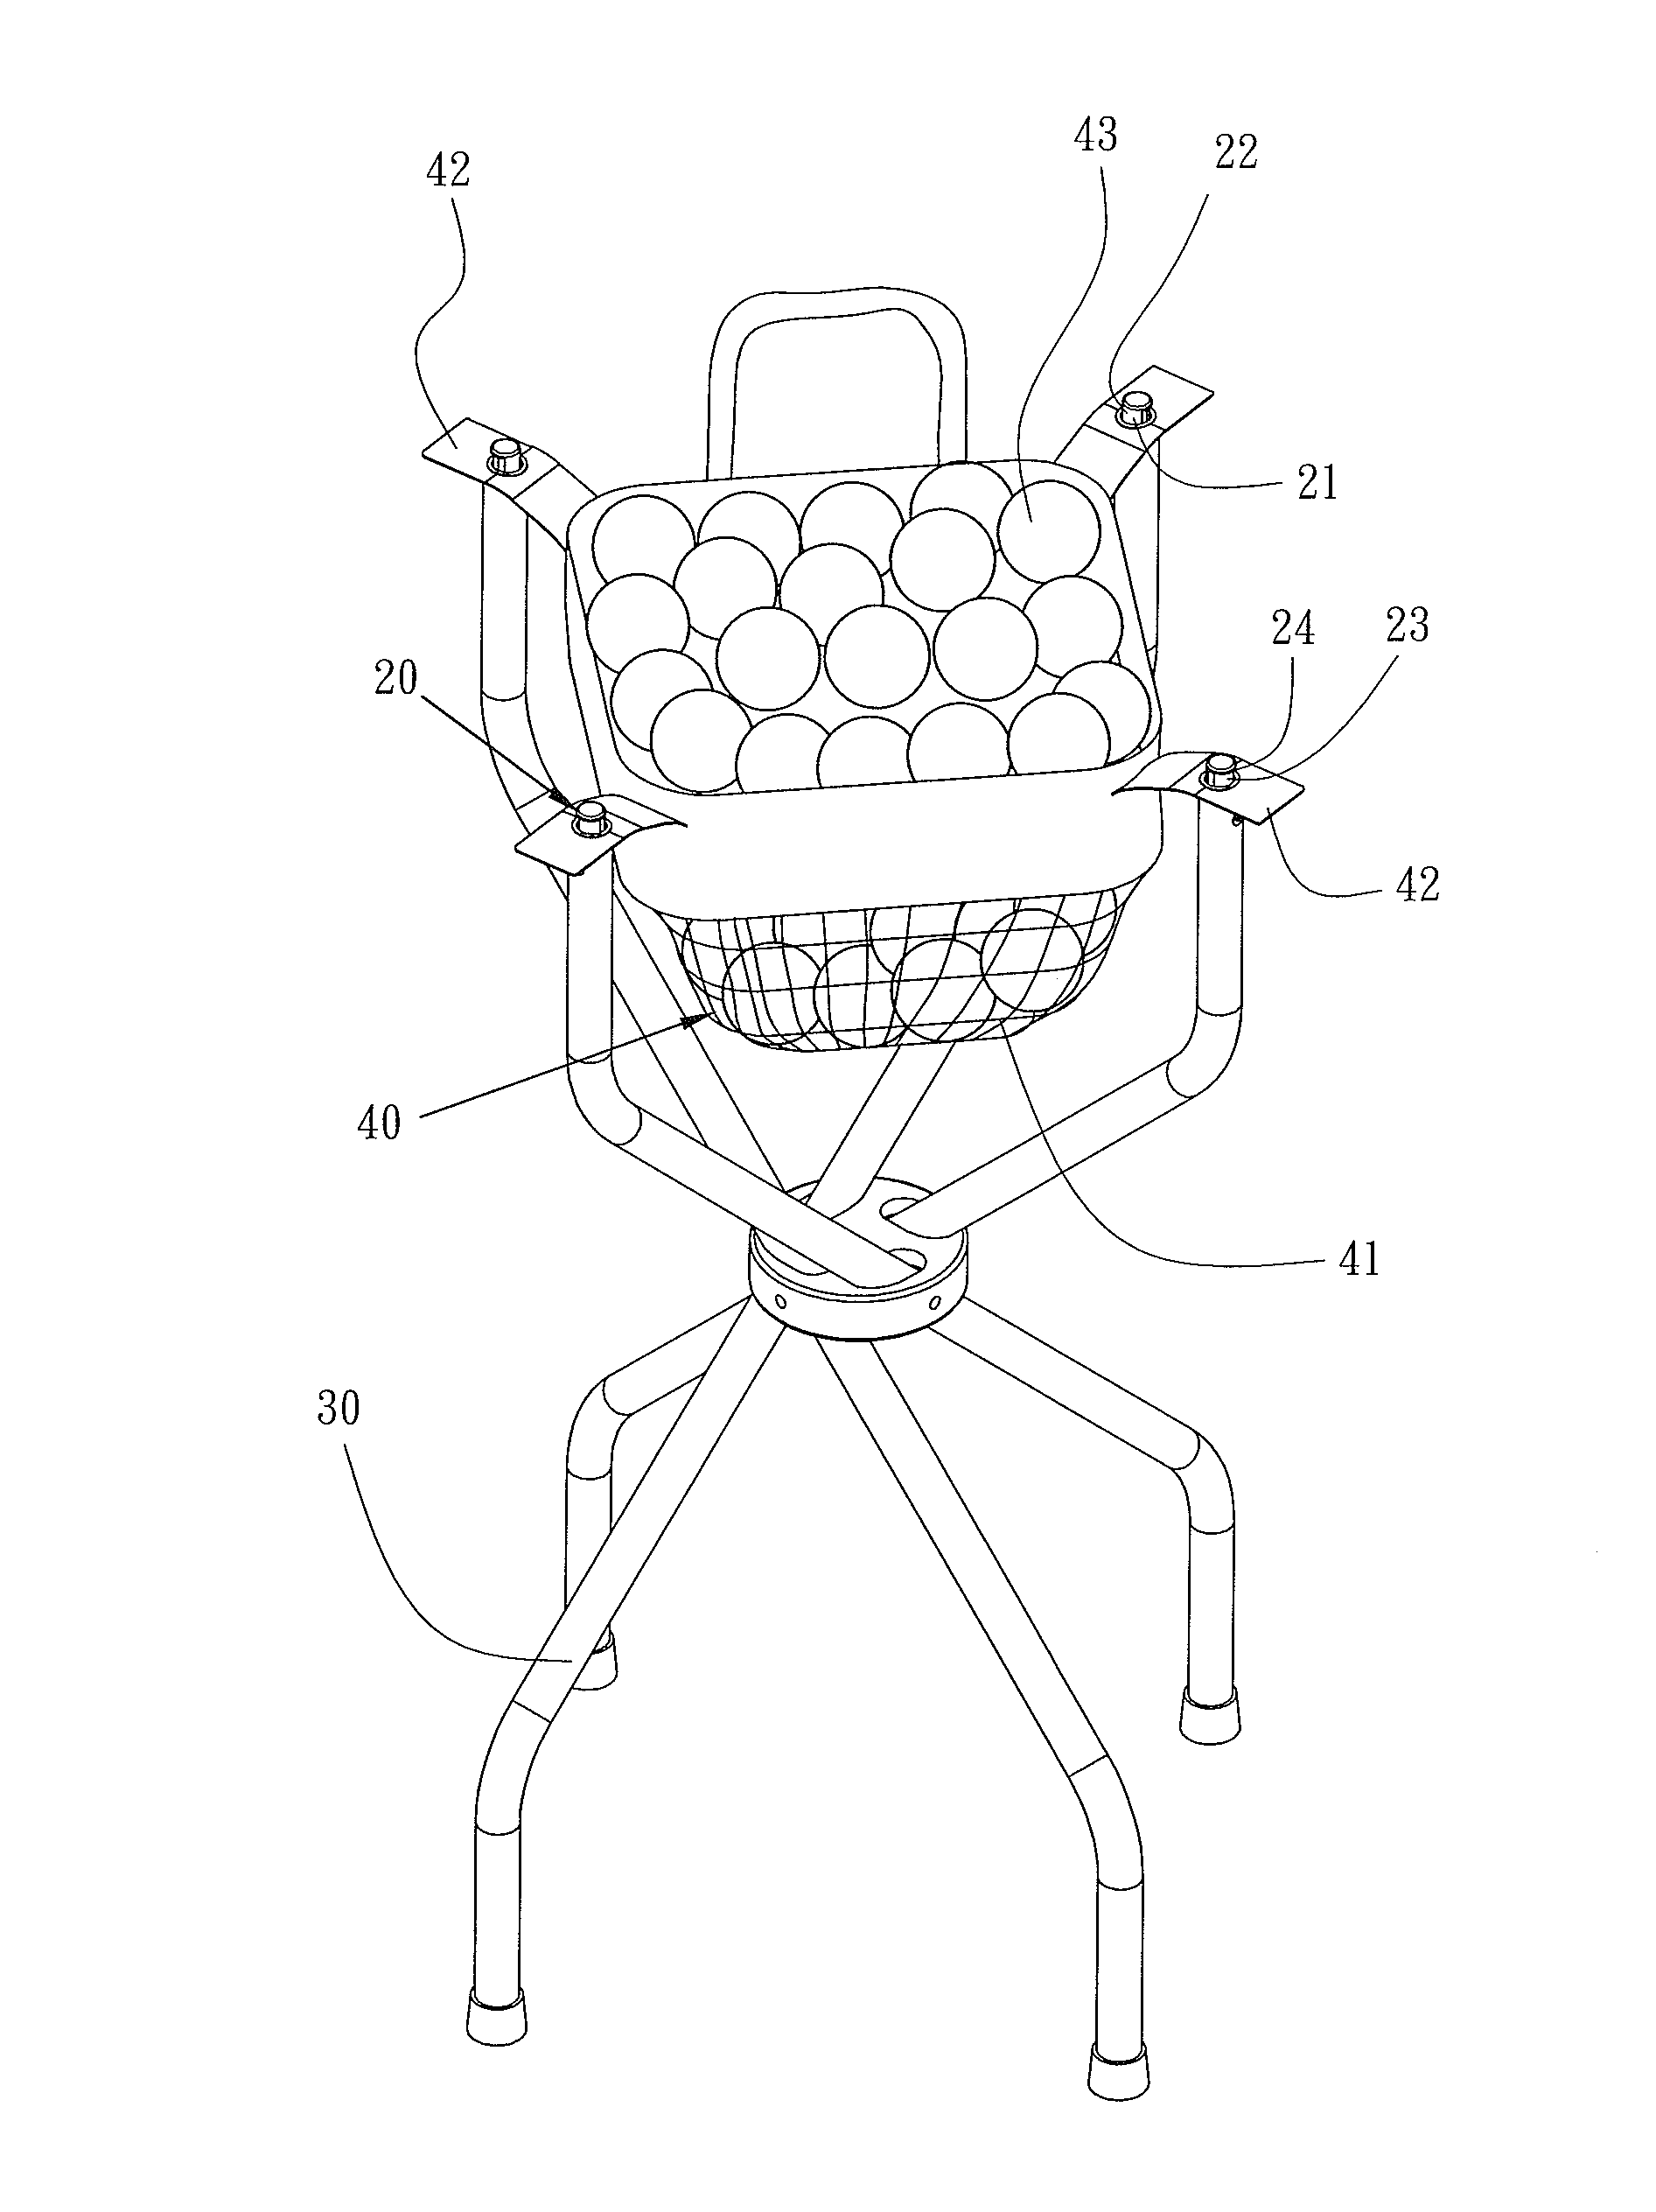 Ball Bag Stand and Ball Bag Engagement Structure